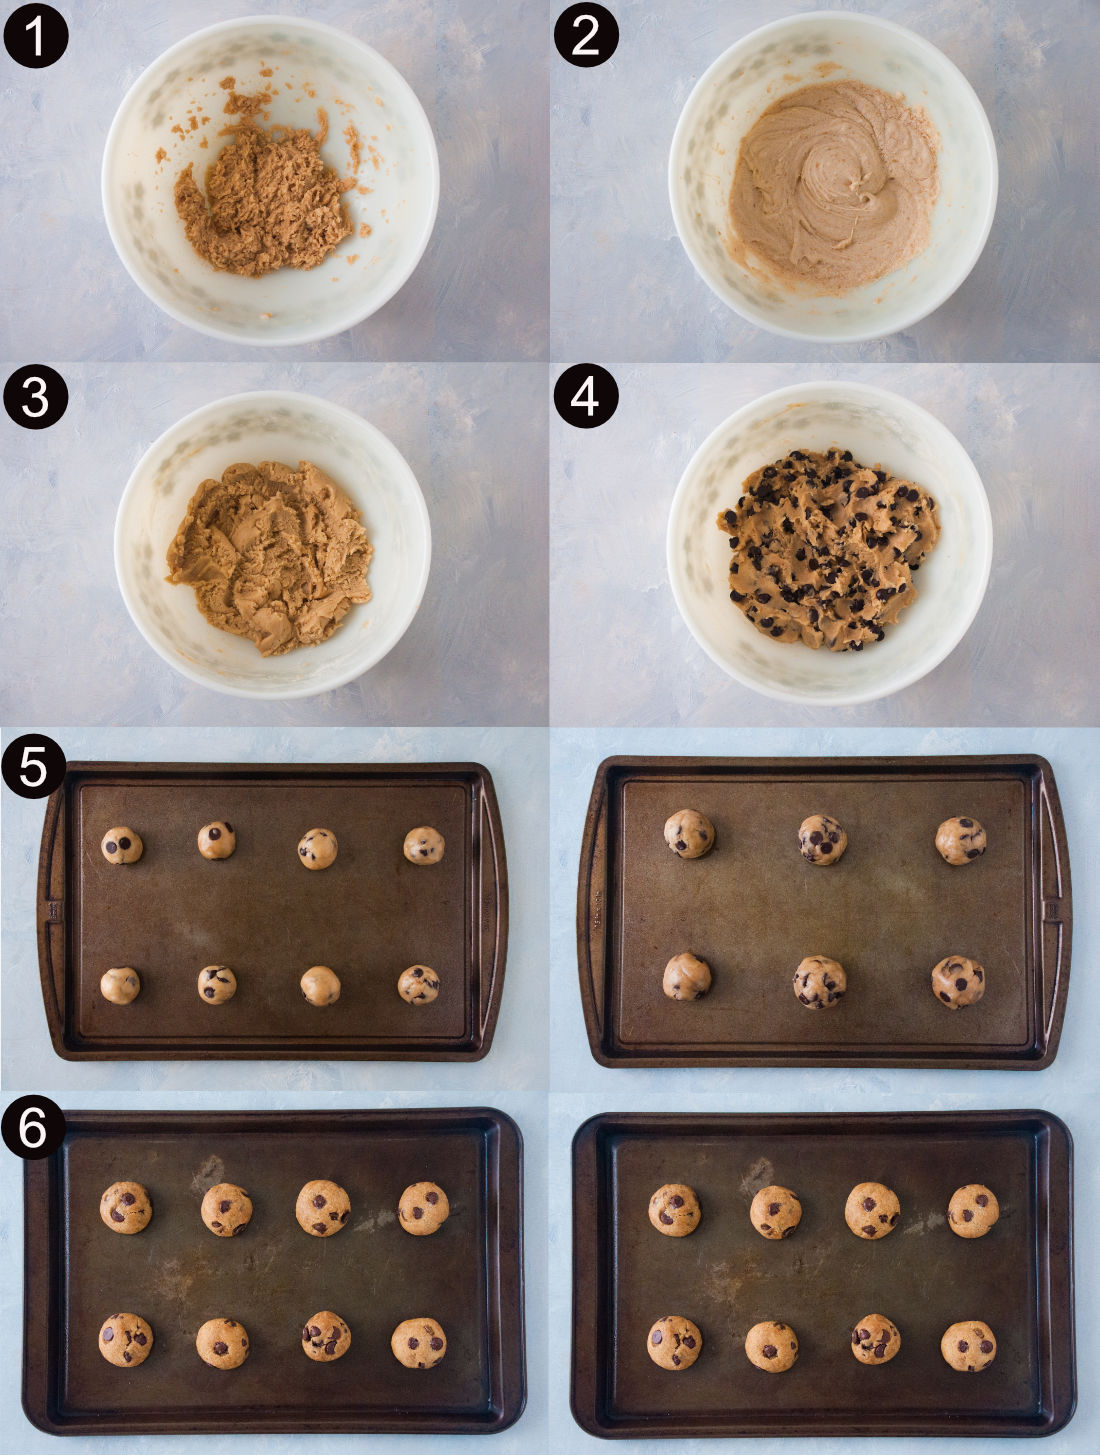 Step-by-step process to make Vegan Chocolate Chip Cookies